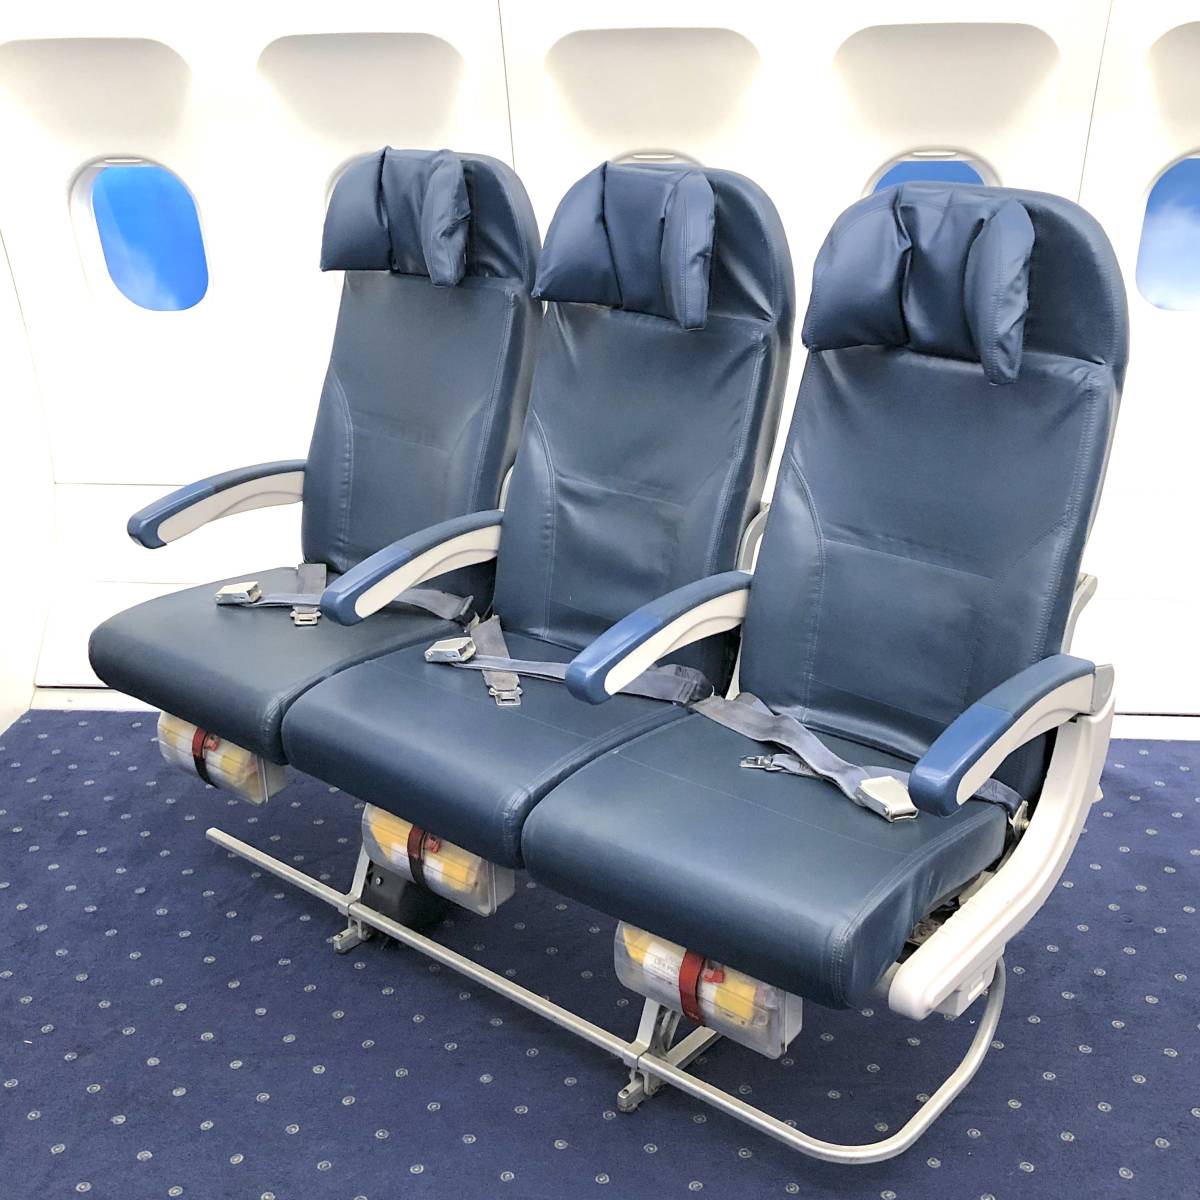 [ one point thing limited goods ] machine inside entame monitor attaching Boeing747-400 Delta Air Lines 3 row seat aircraft seat interior . position goods passenger's chair rare hard-to-find goods 